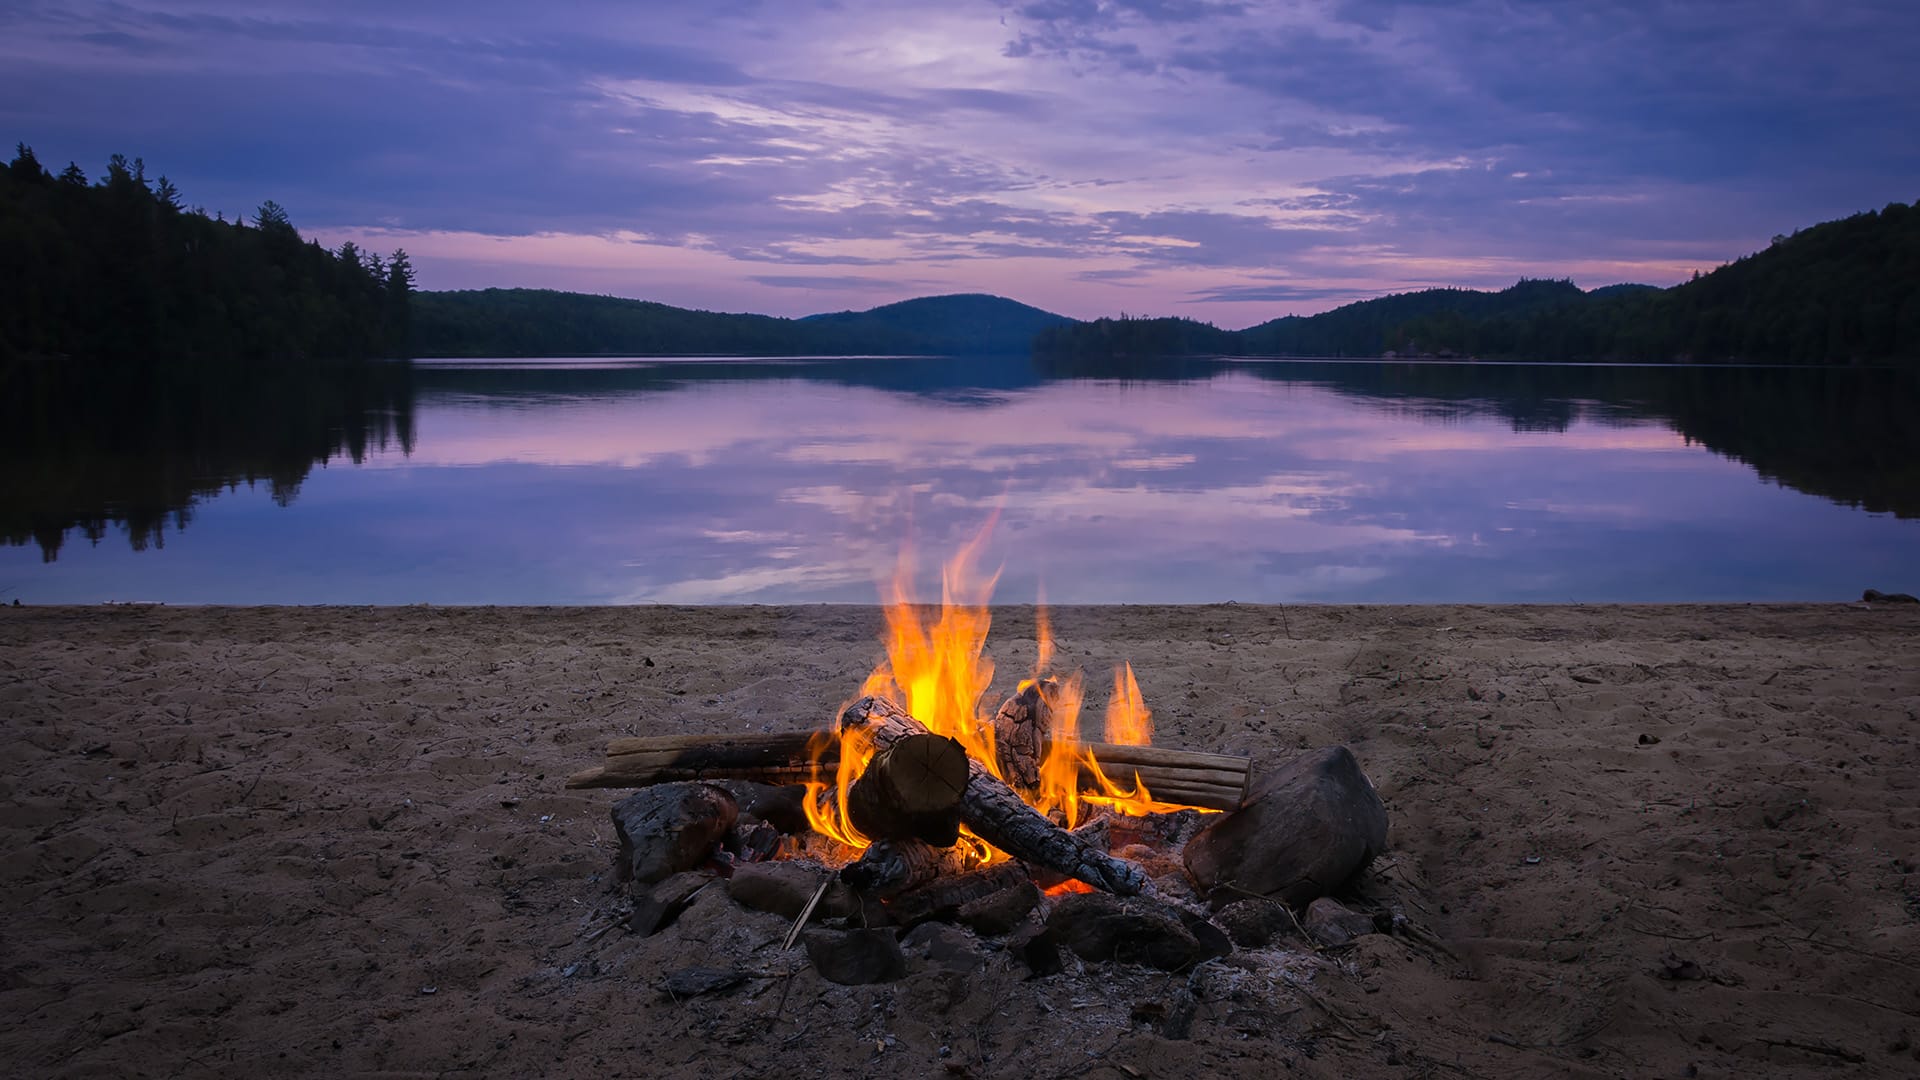 From Beachside Bonfires to Mountain Backdrops, 6 Canada Beaches to Visit This Fall